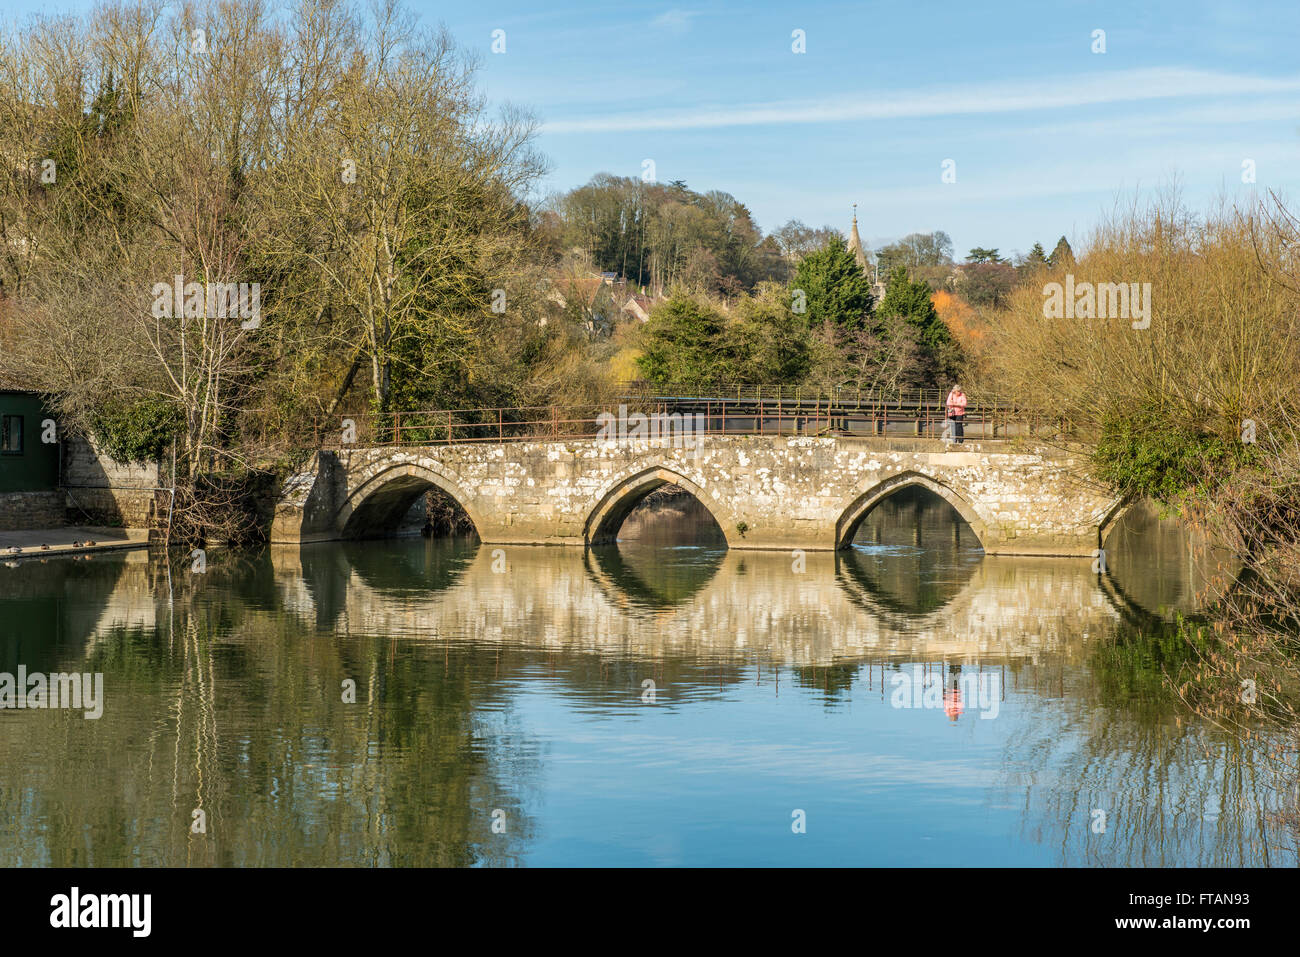 The Old Packhorse Footpath Bridge over the River Avon at Bradford on Avon, Wiltshire Stock Photo